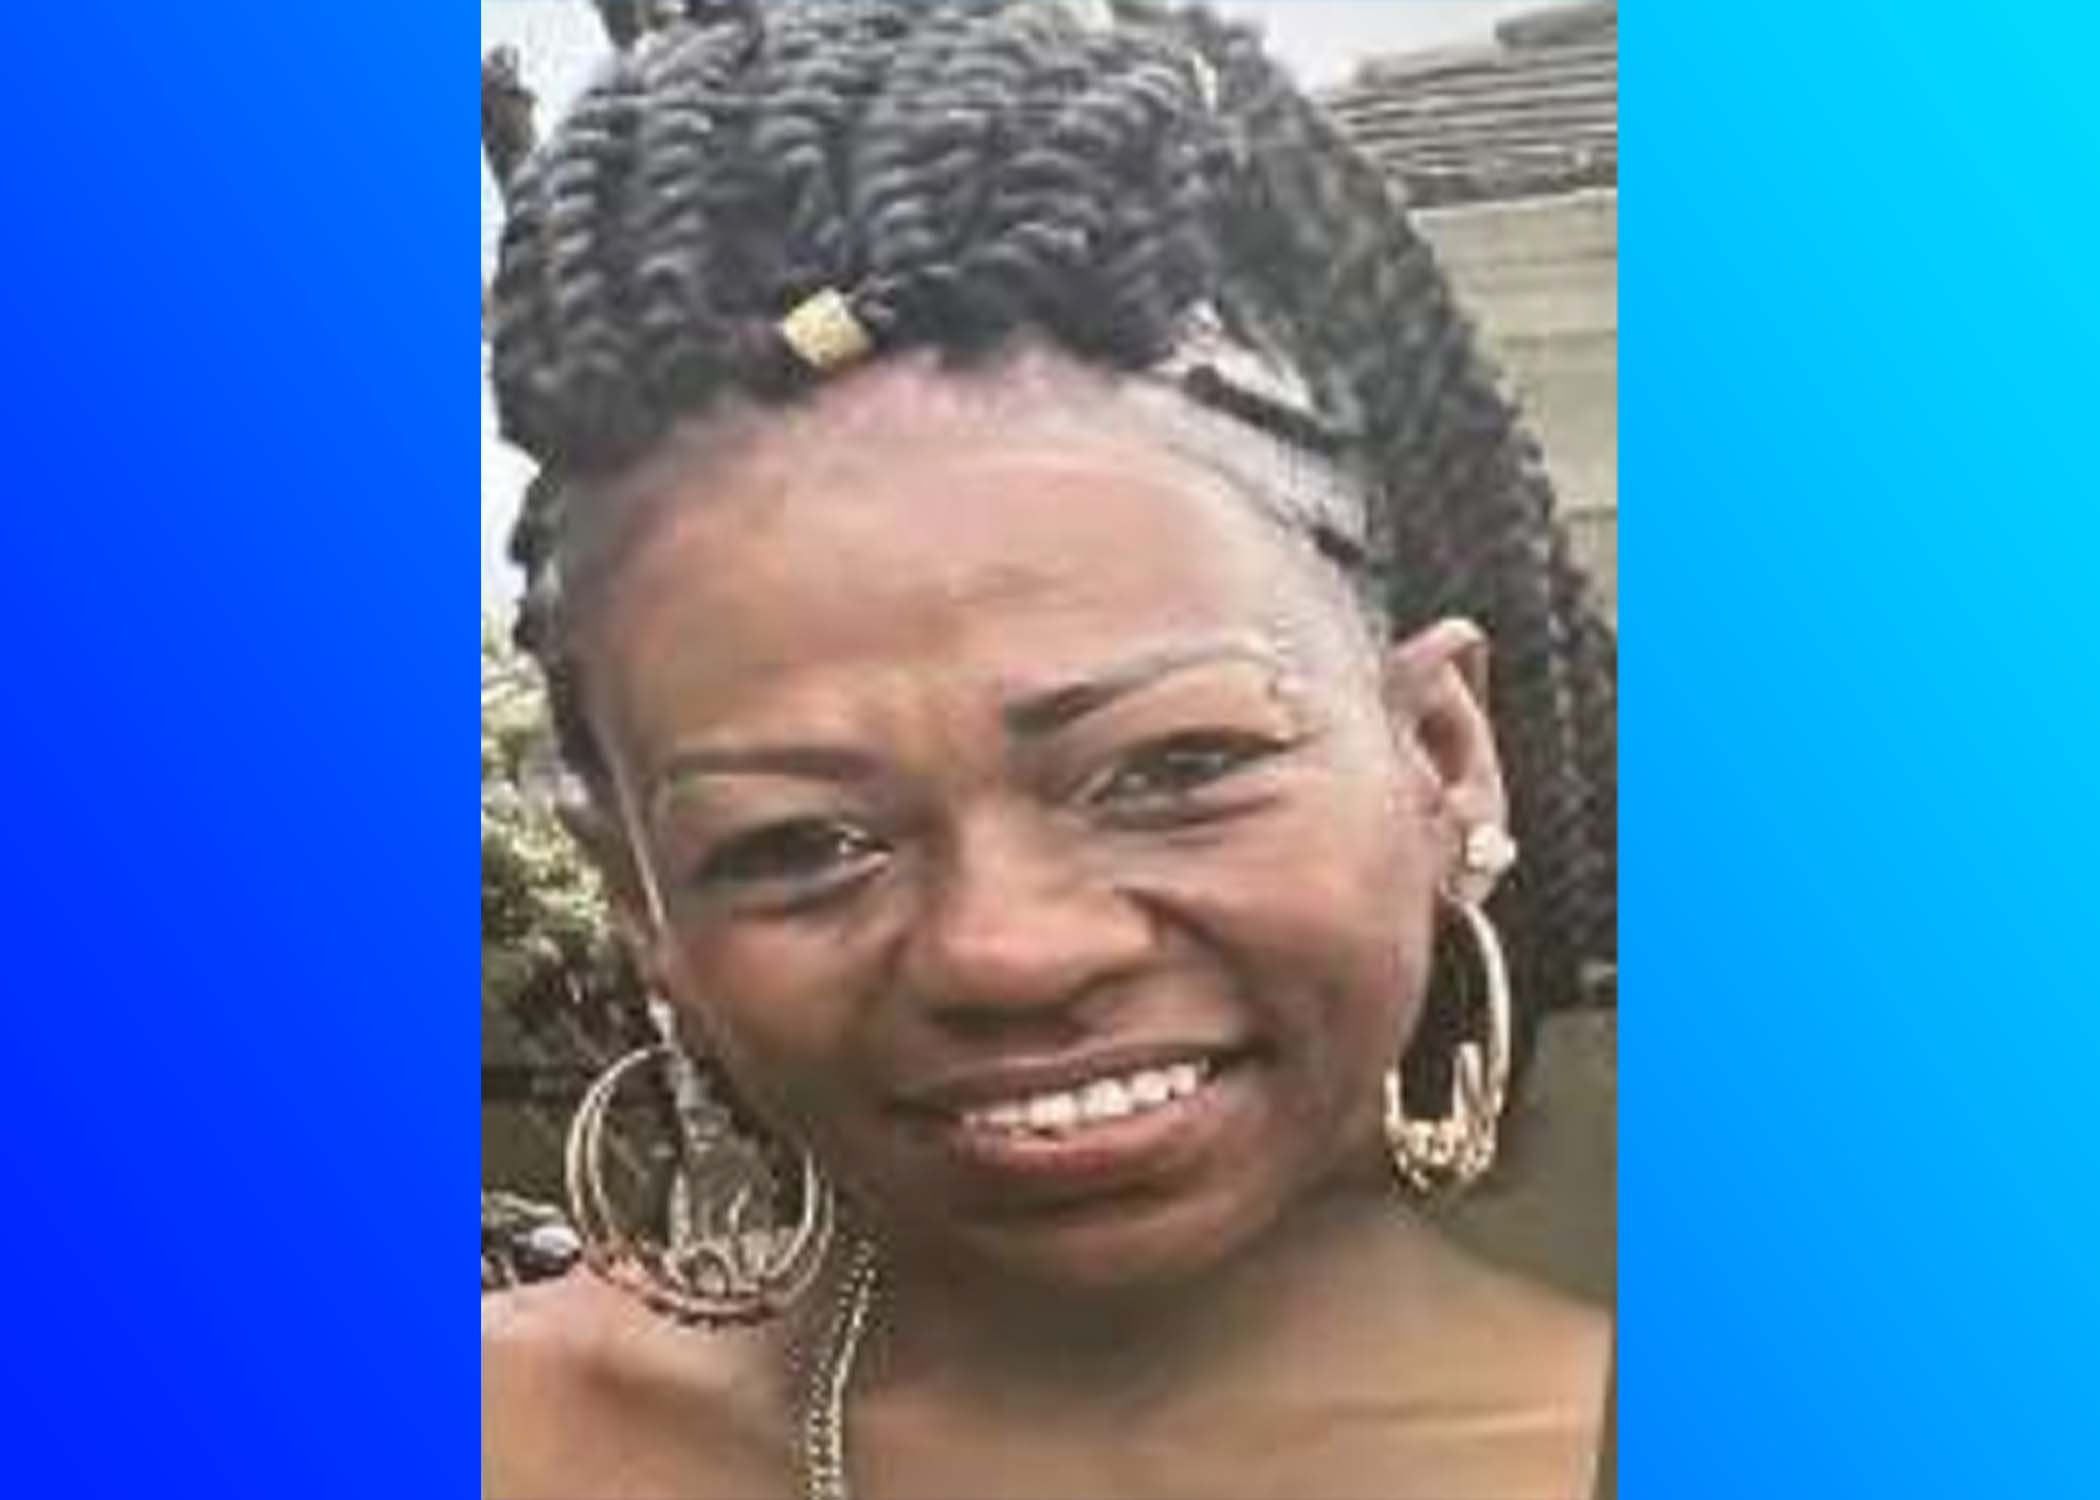 Missing and endangered person alert issued for Homewood woman